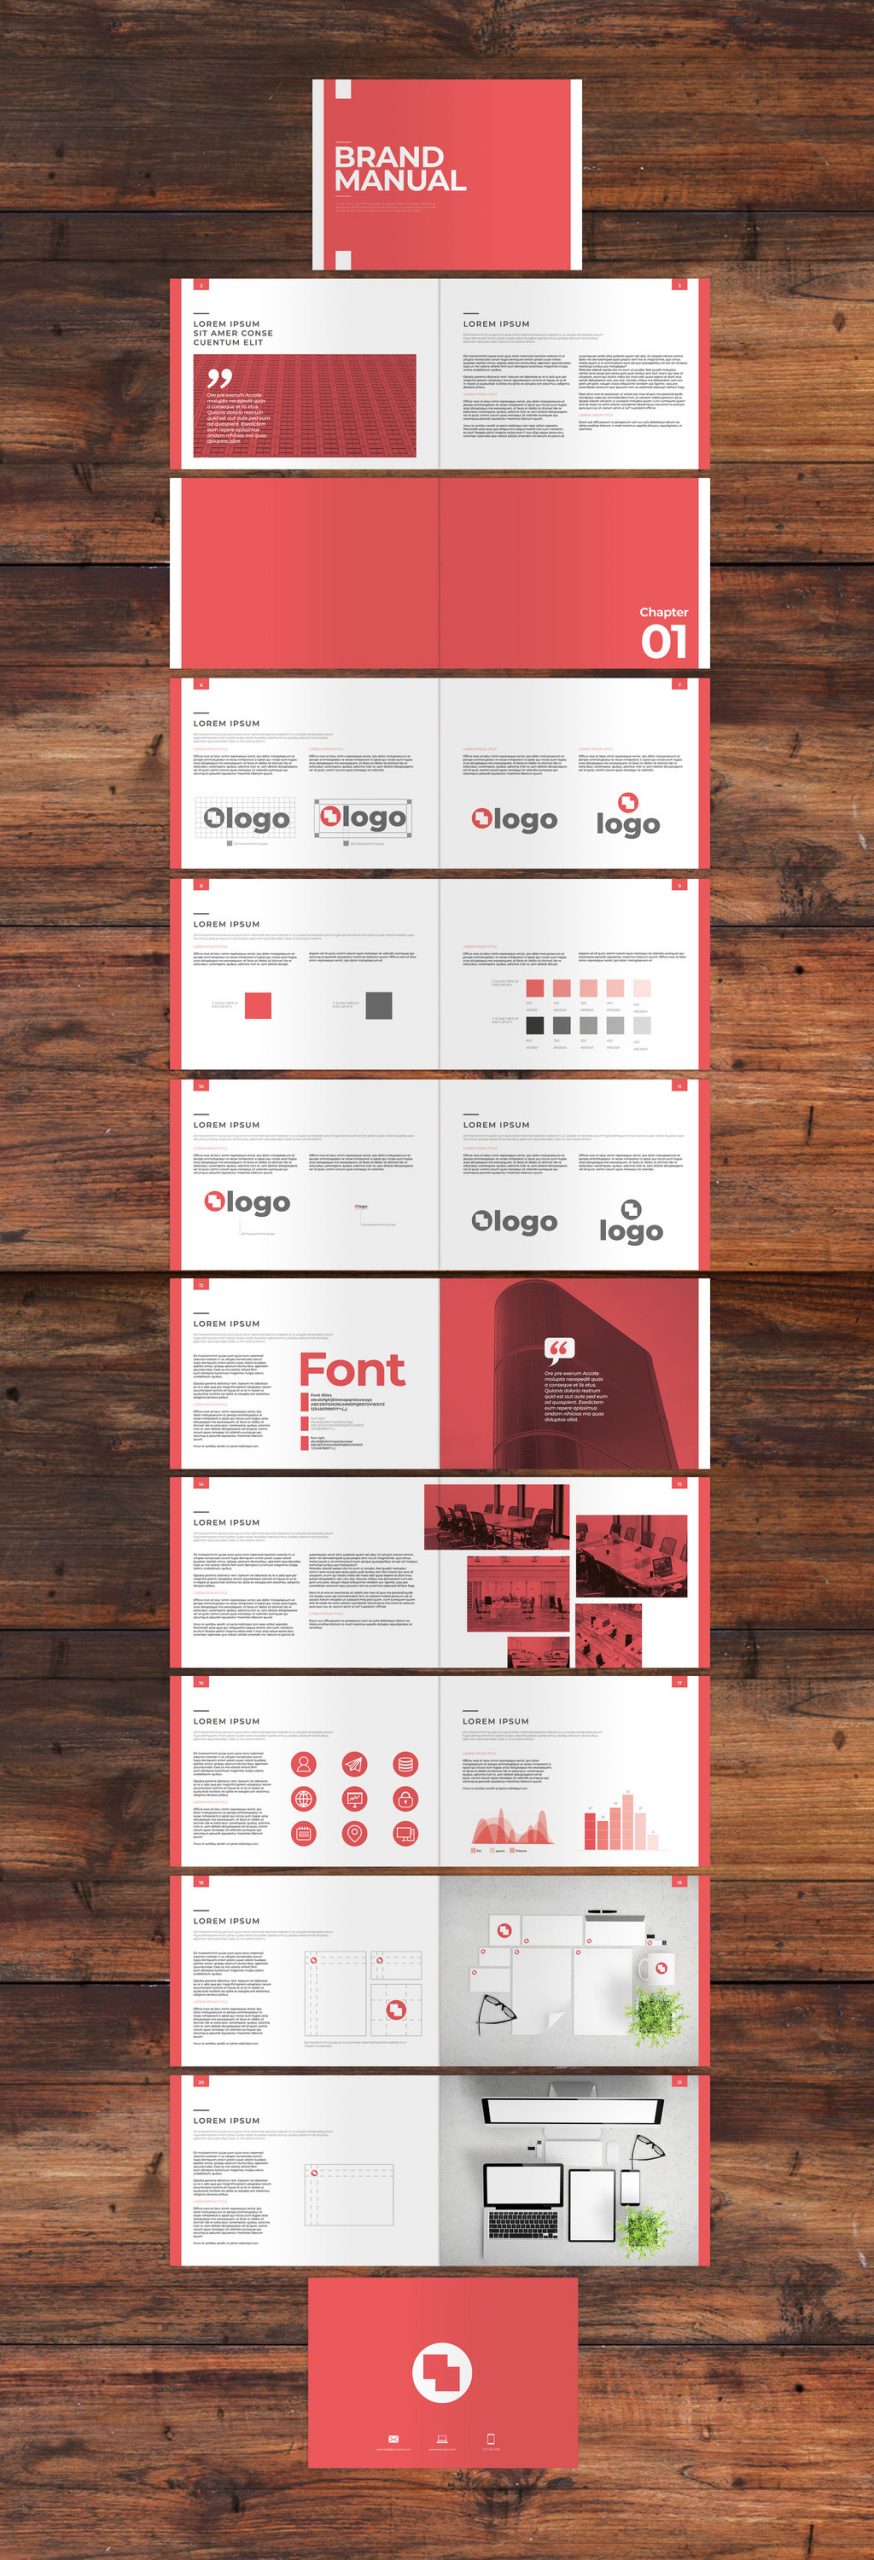 Red & White Brand Manual Template for Adobe InDesign